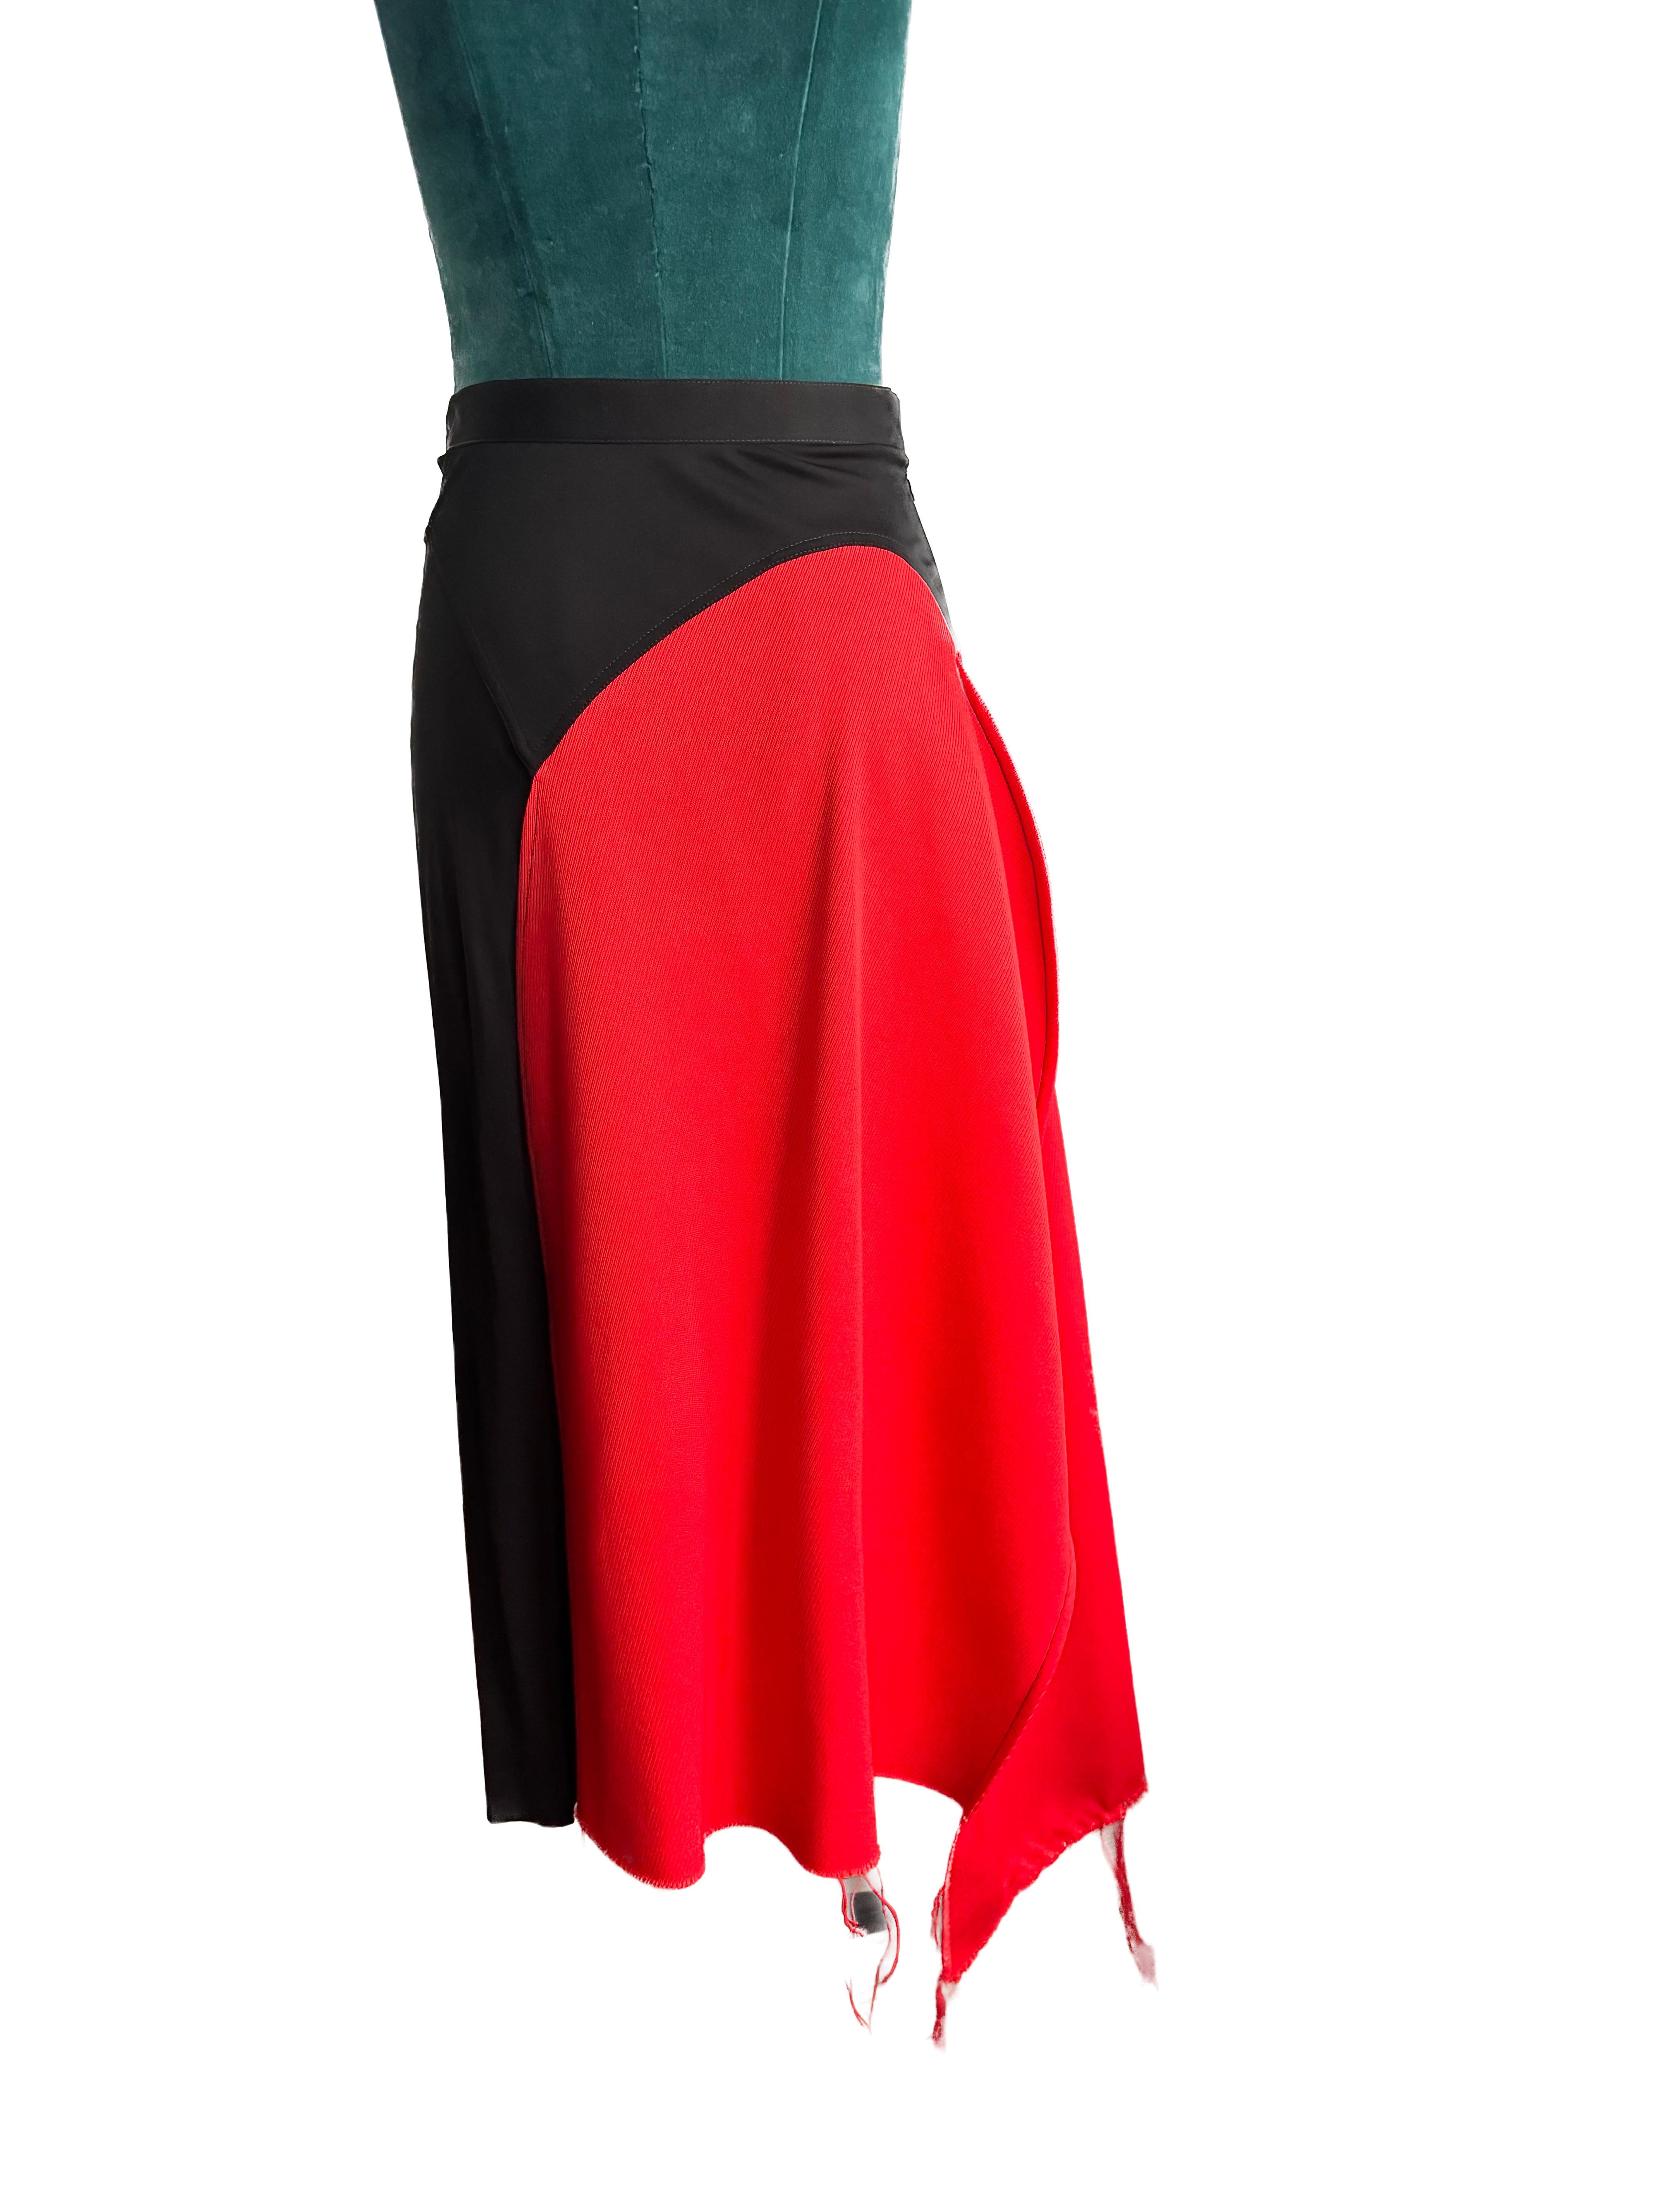 Celine 2017 Runway Black / Red Maxi Skirt  In Excellent Condition For Sale In Toronto, CA